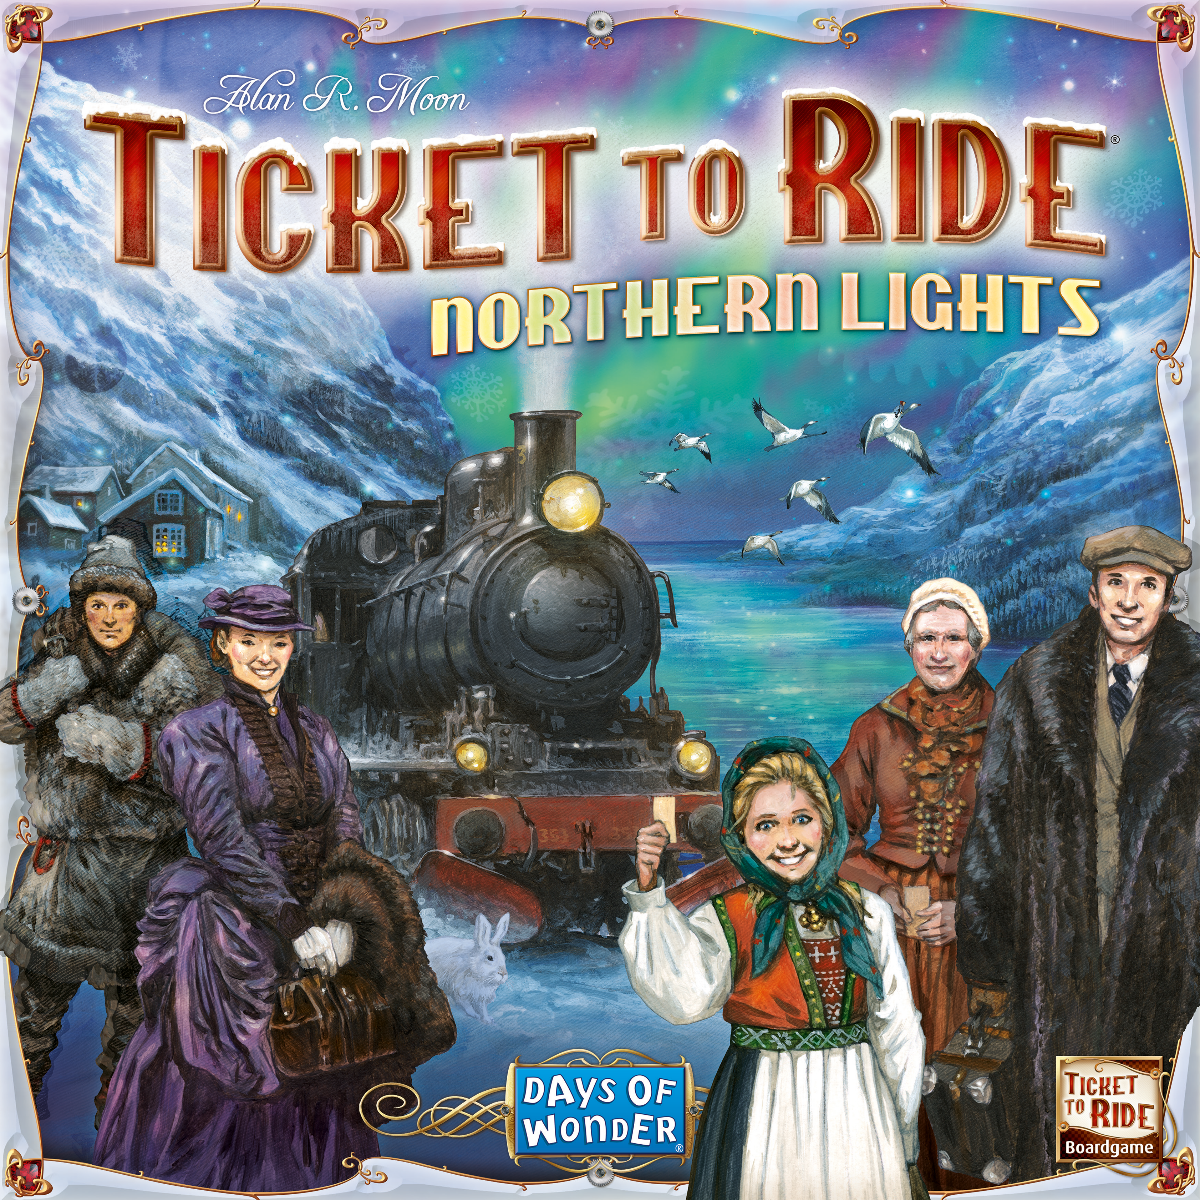 Ticket to ride, northern lights